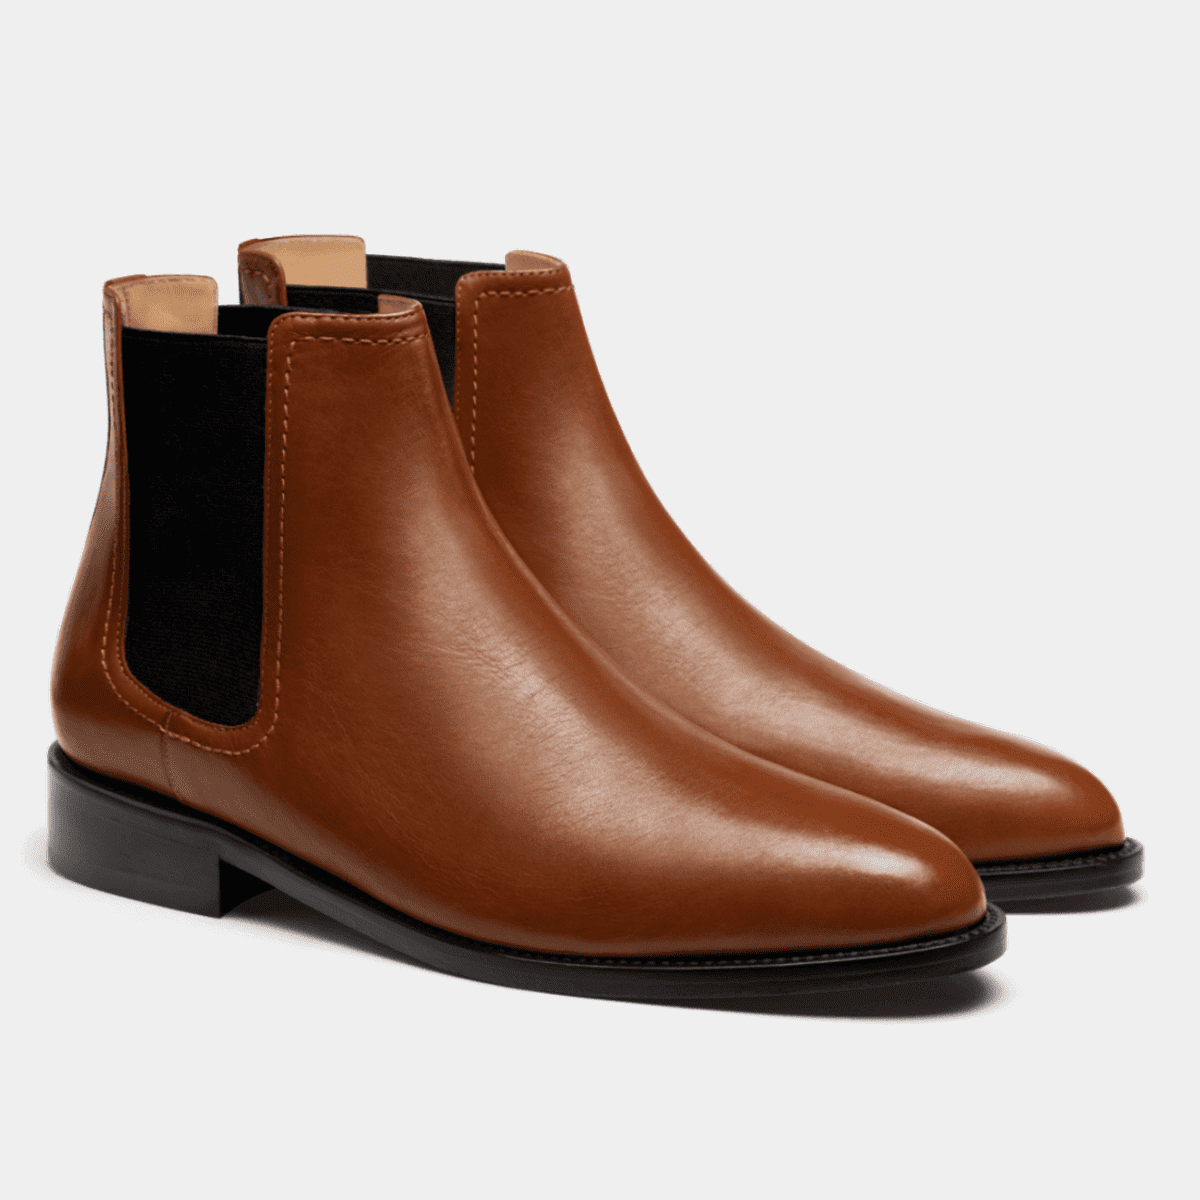 Boots | Handmade Chelsea Boots for Hockerty